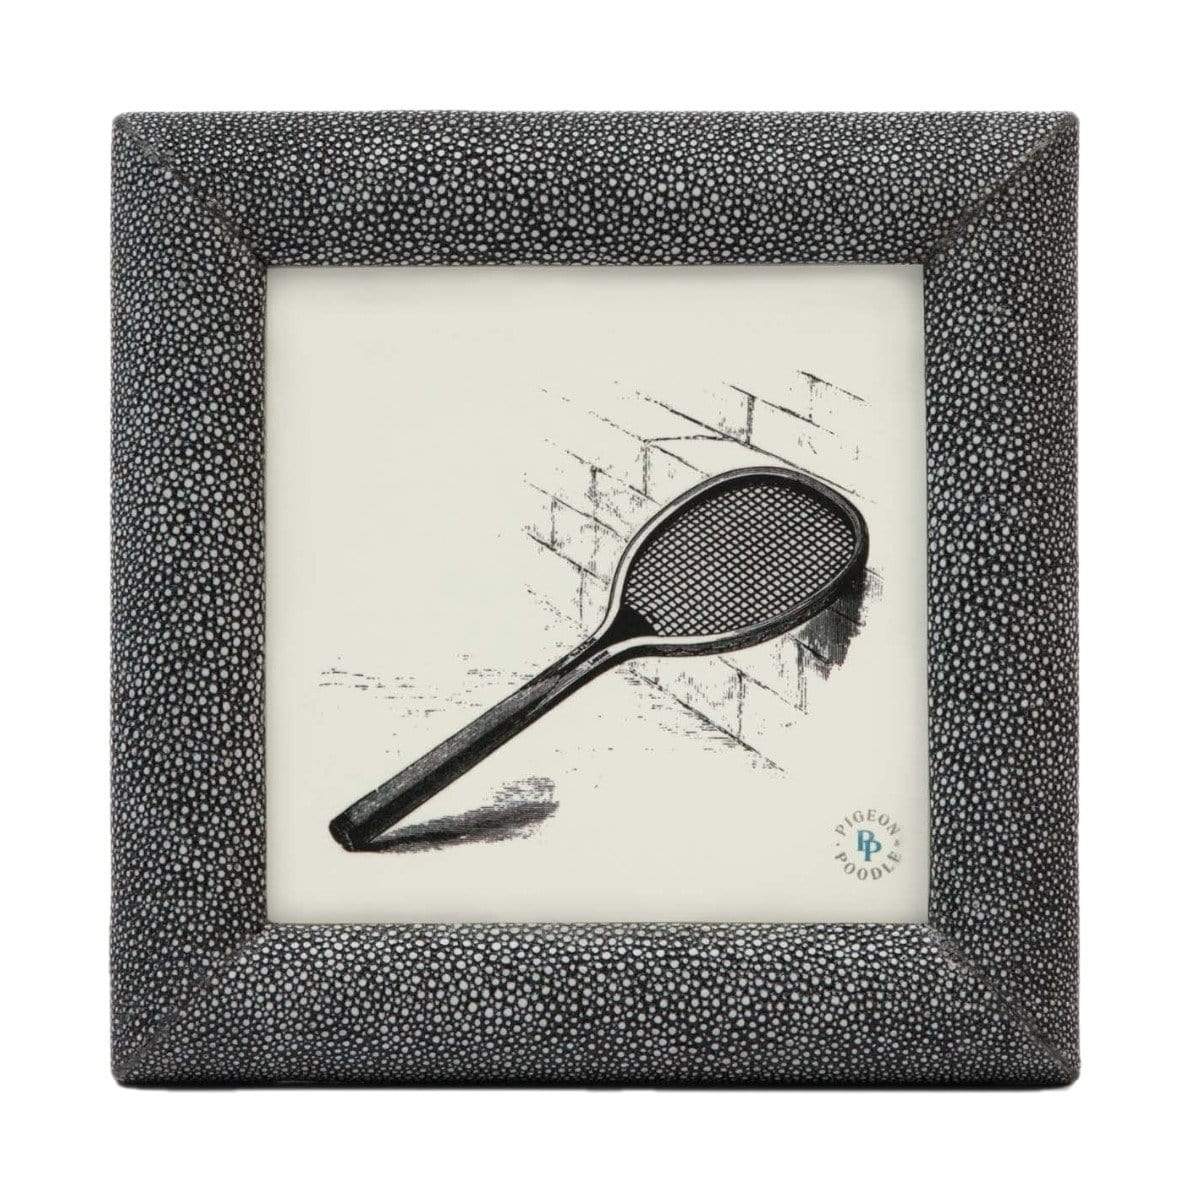 Copy of Pigeon & Poodle Oxford Picture Frame - Cool Gray Pillow & Decor